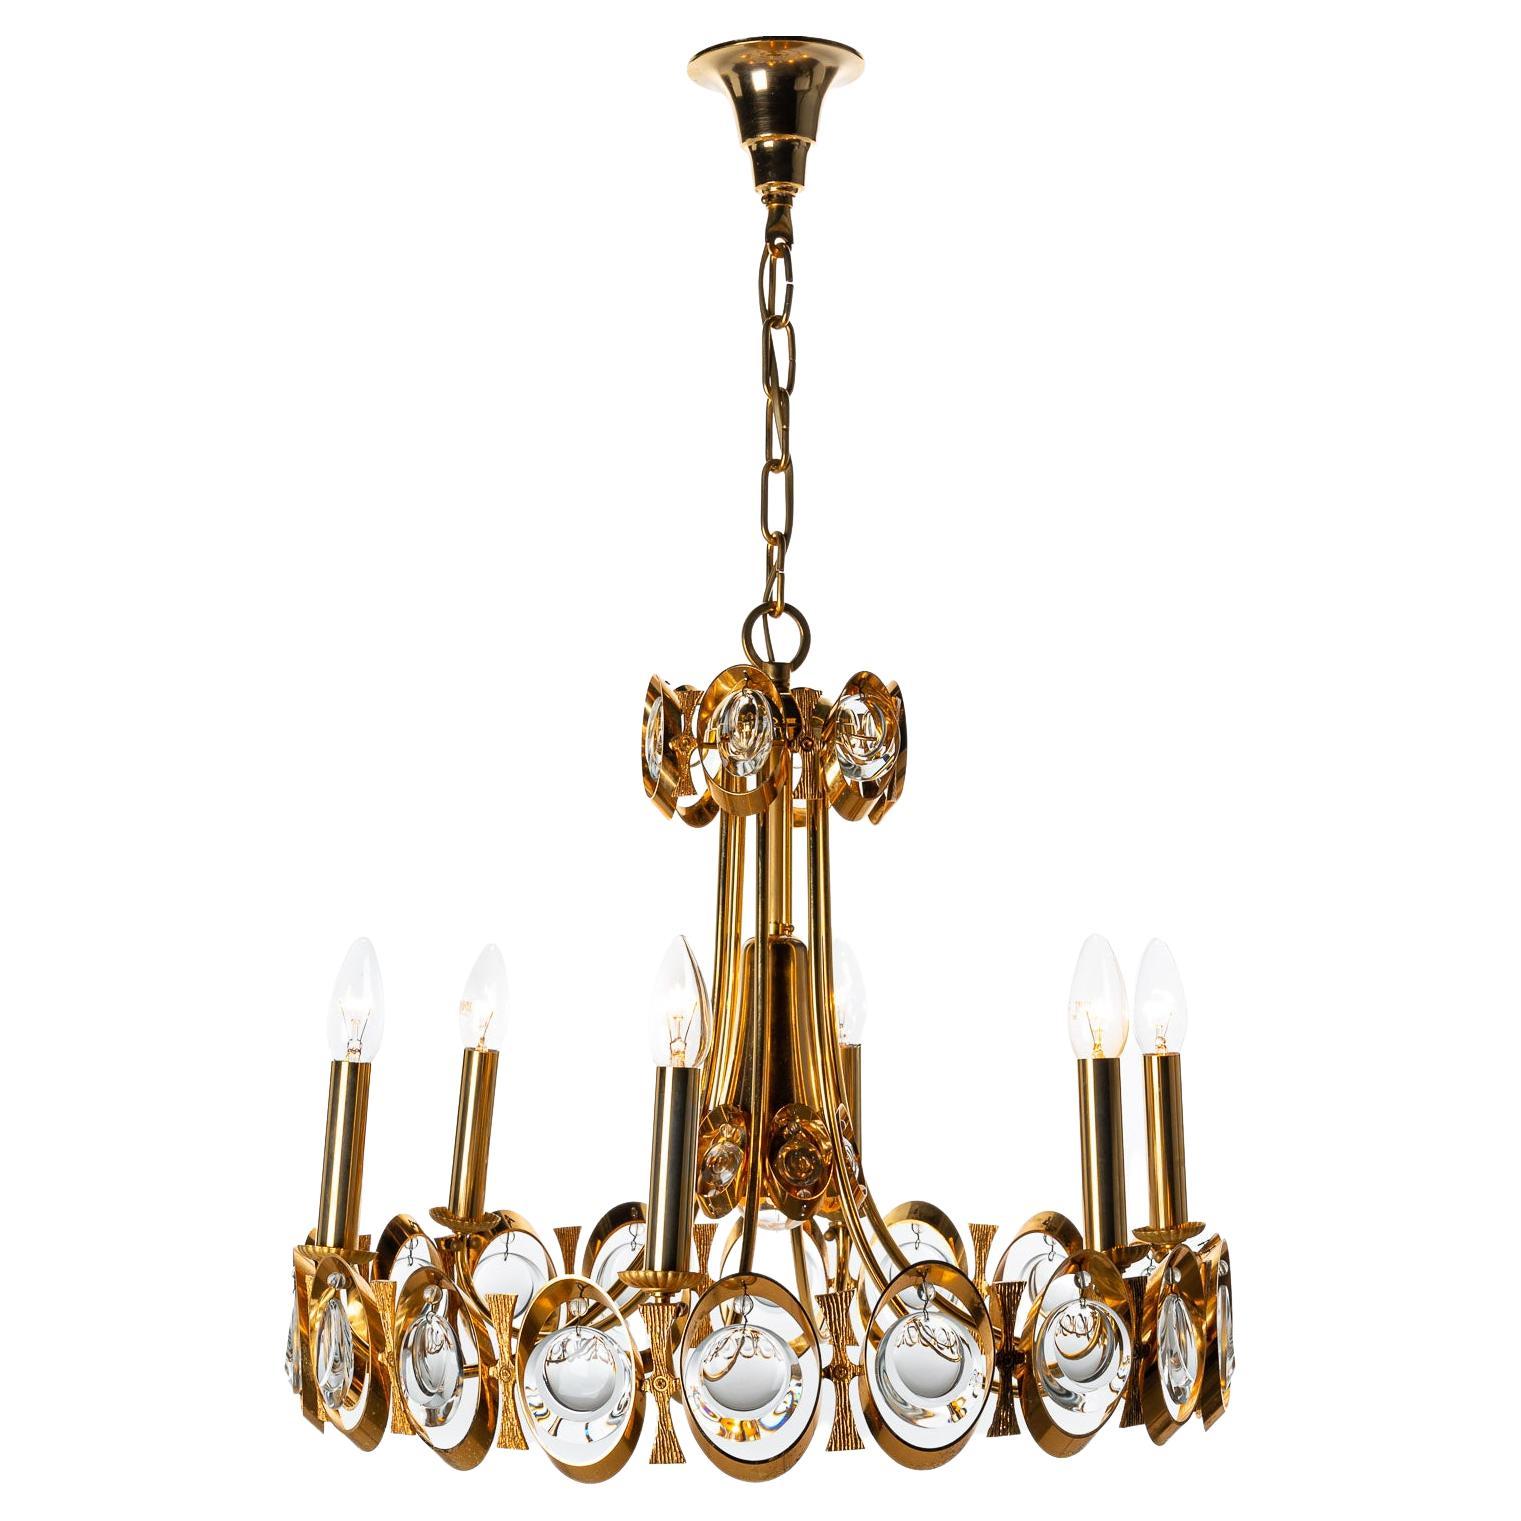 1960's Brass and Crystal Glass Chandelier by Palwa